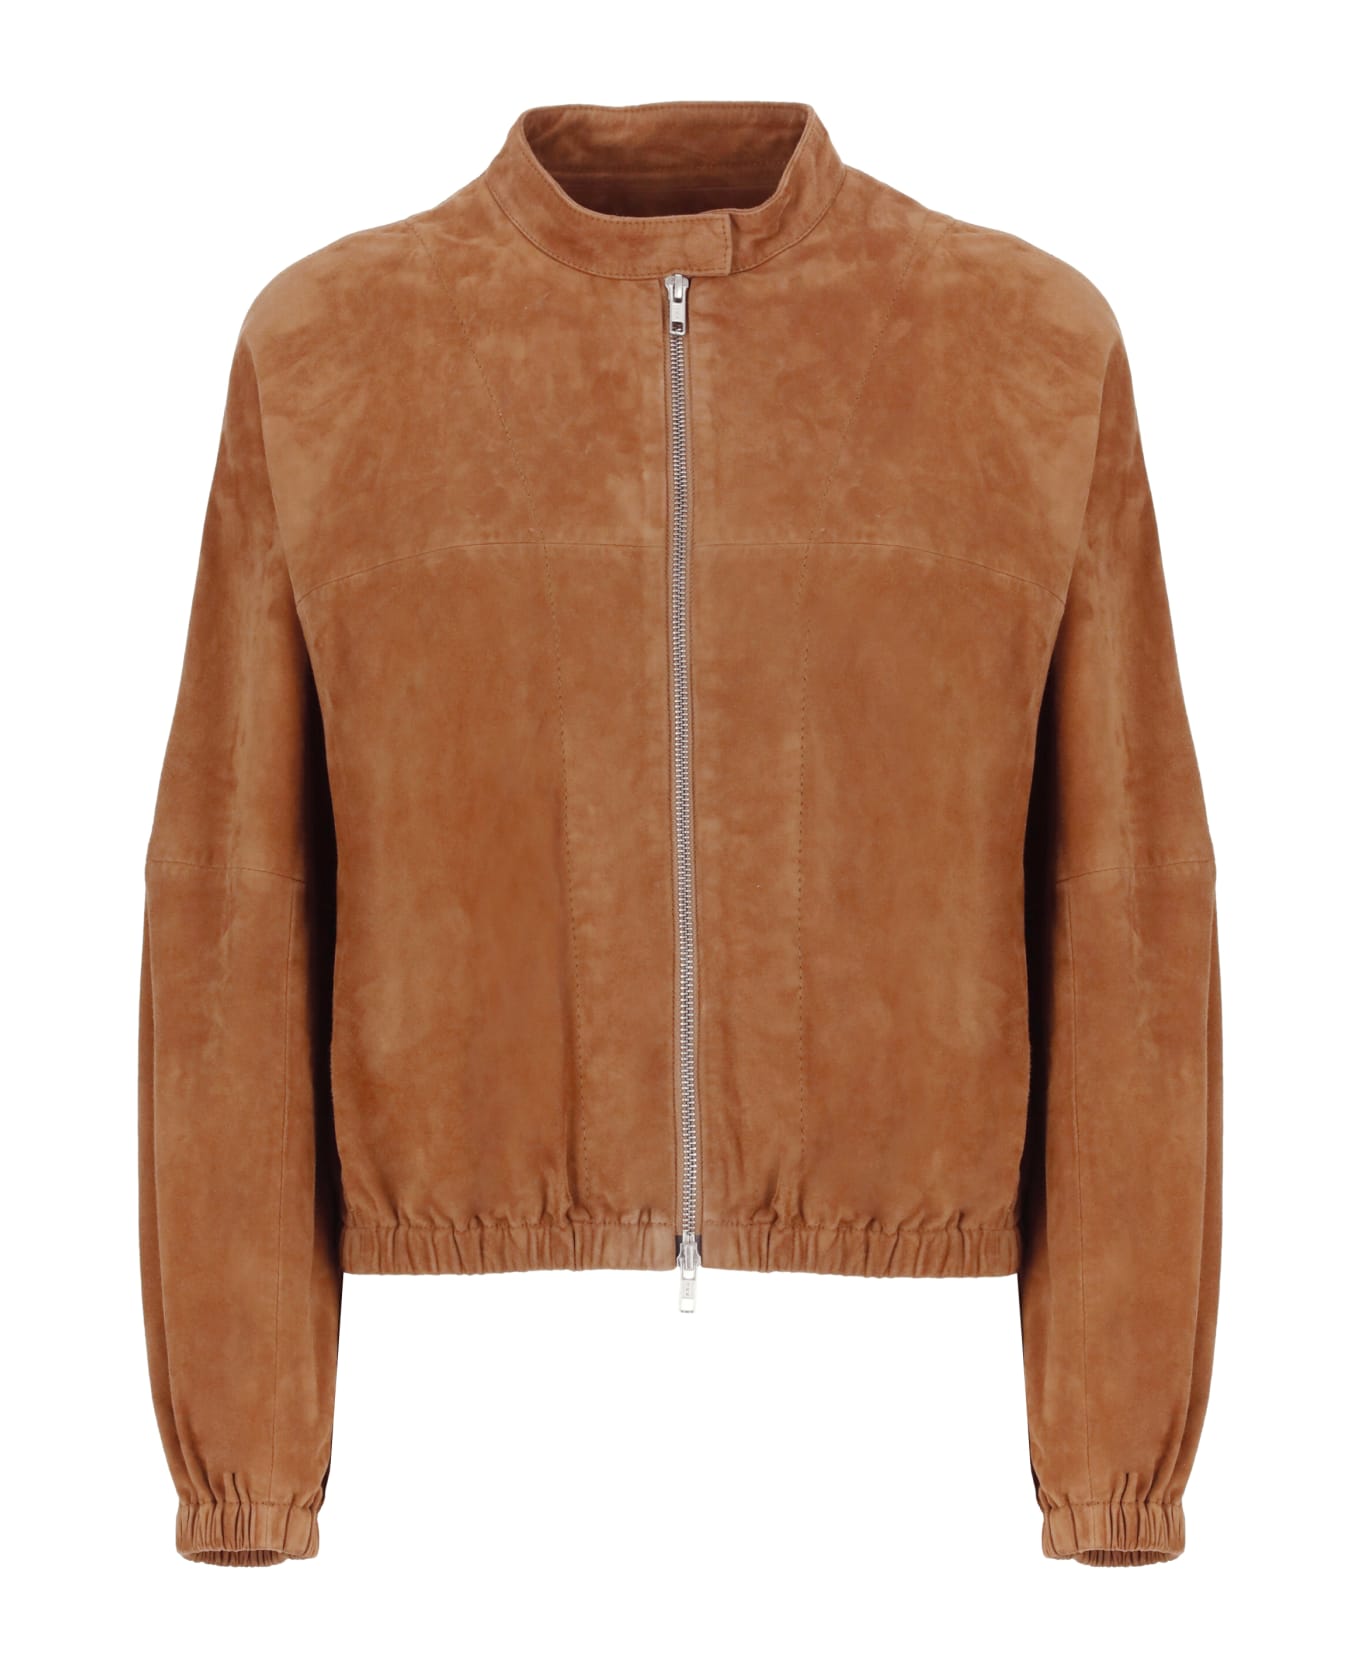 Bully Suede Leather Bomber Jacket - Brown